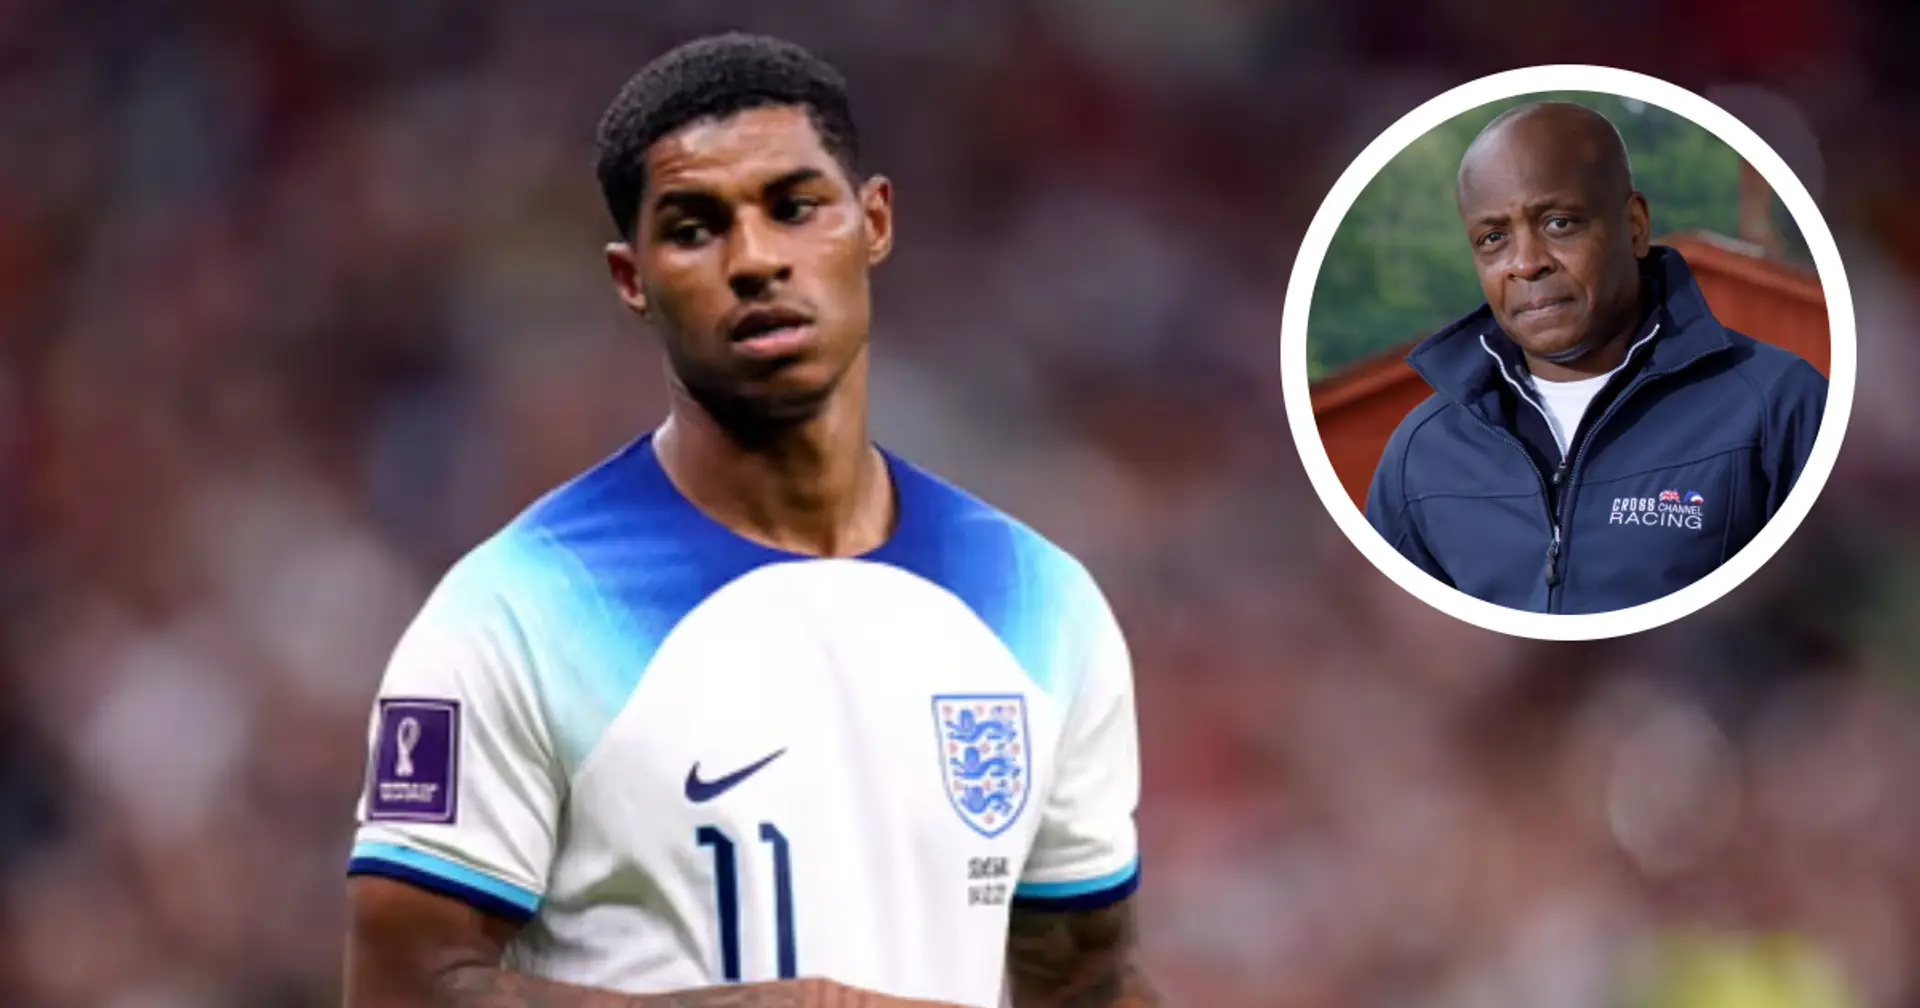 'Selfish' Marcus Rashford told he 'should not be playing for England' by ex-Man United defender